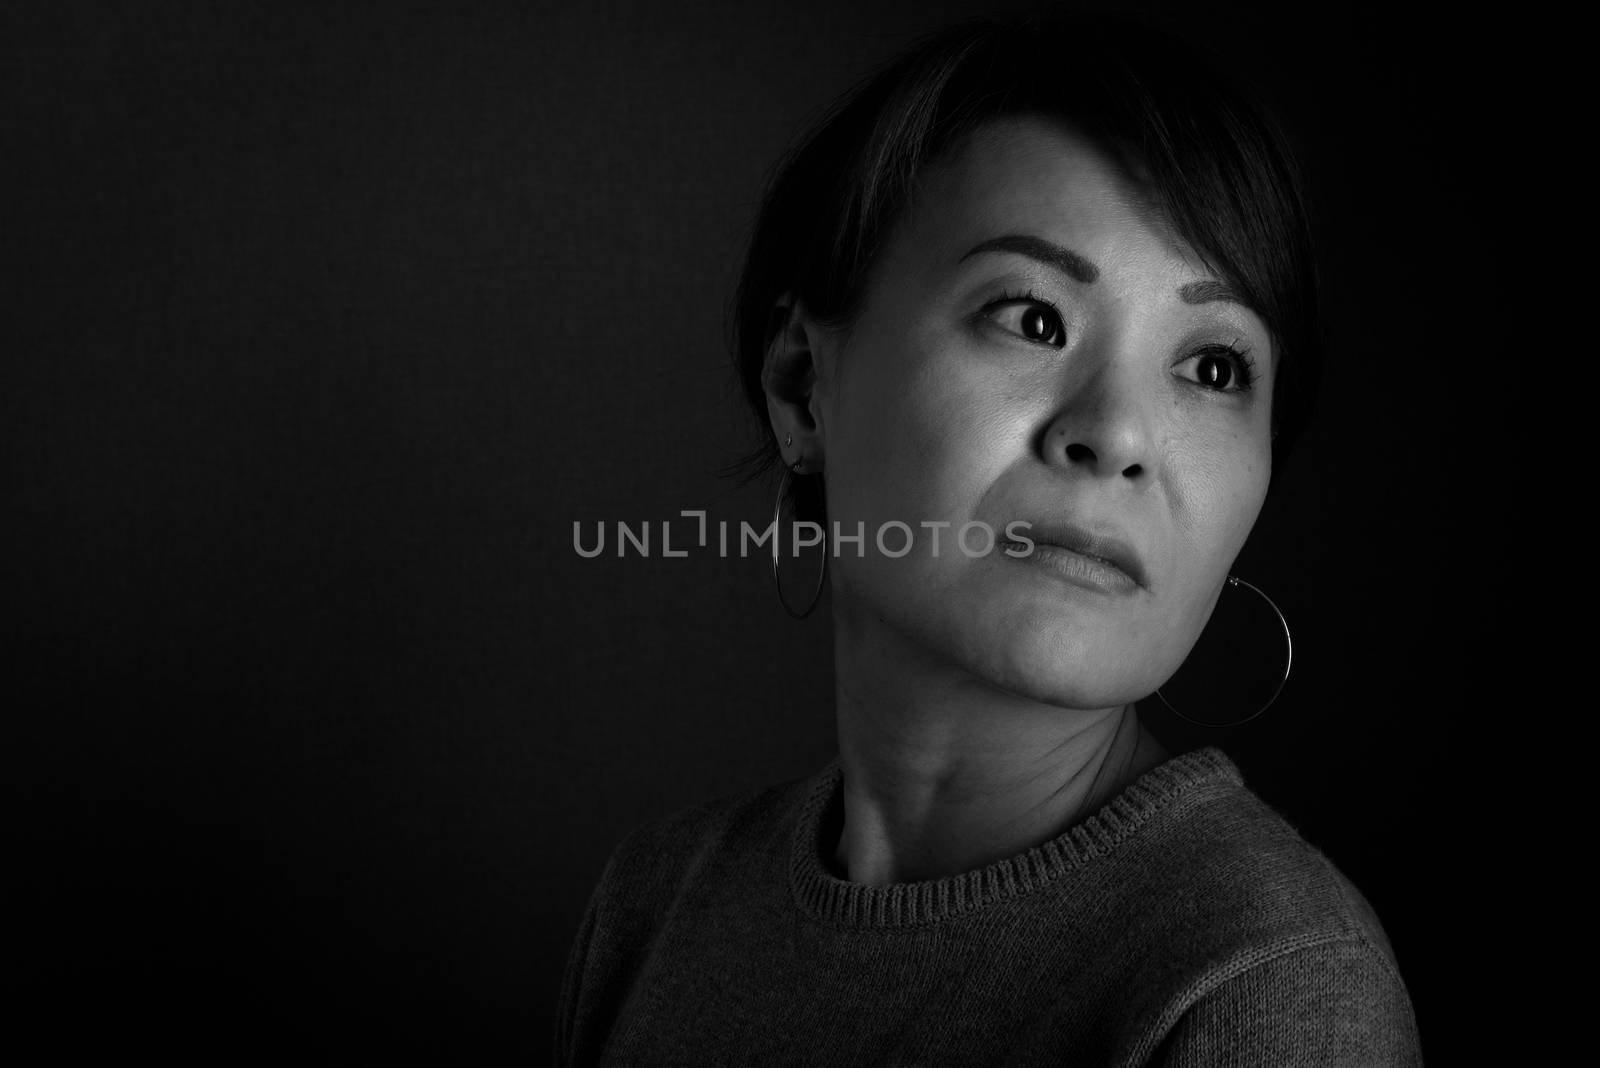 A black and white headshot of a sad looking middle aged Japanese woman.